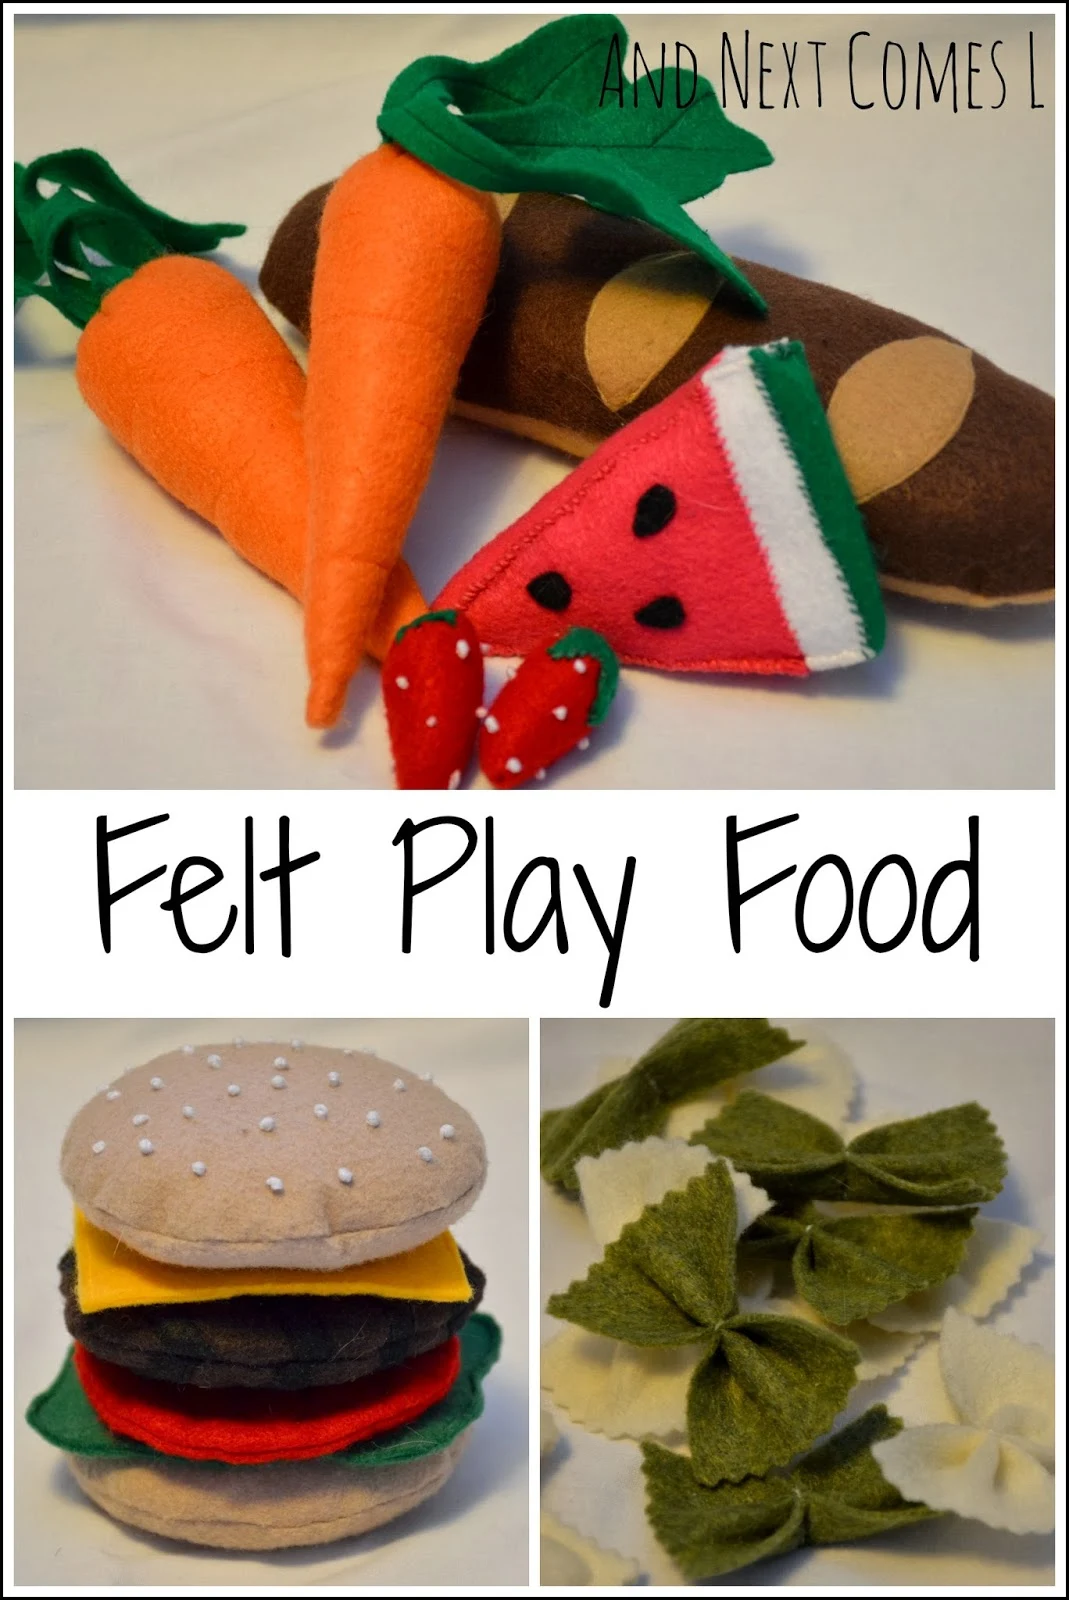 Tutorials for making your own felt play food for kids from And Next Comes L